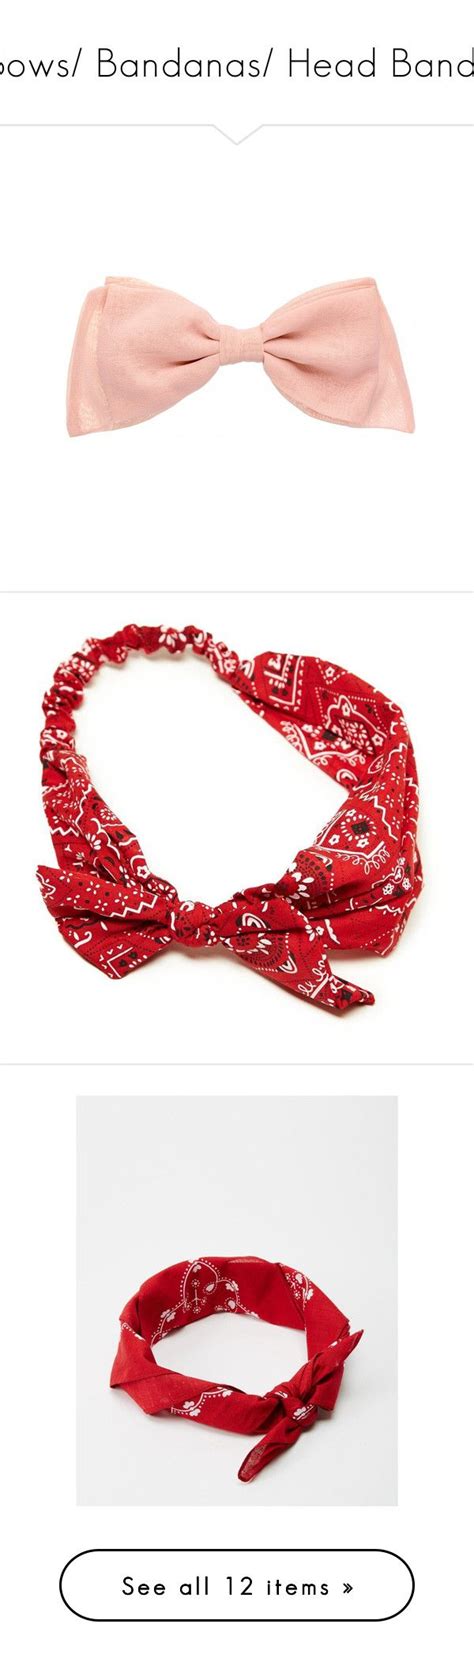 Bows Bandanas Head Bands By Xoxo Casey Liked On Polyvore Featuring